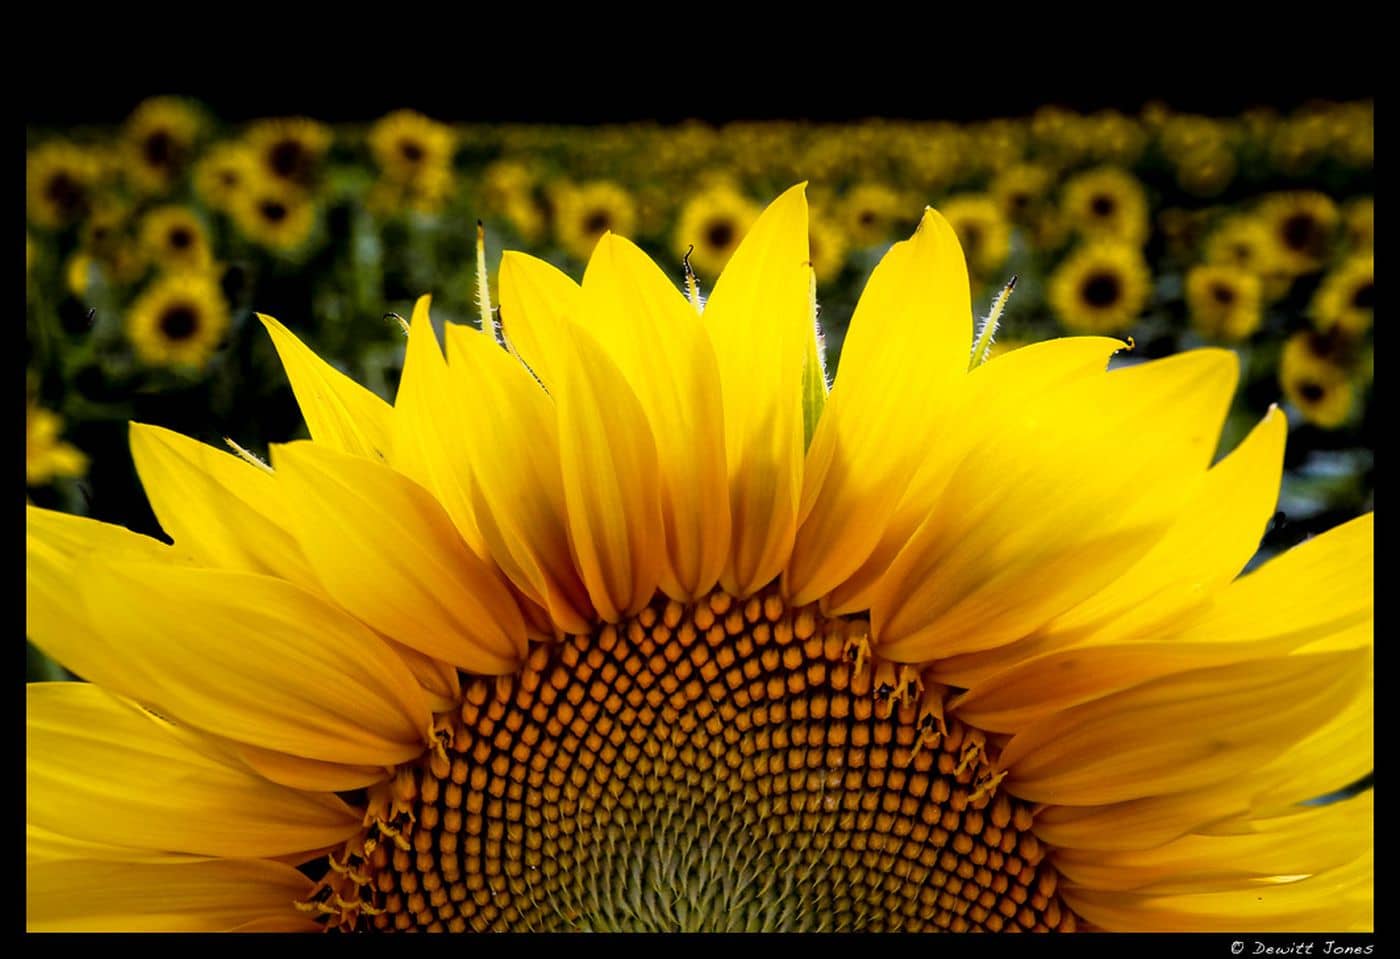 Image: Sunflower close up with a field of sunflowers in the background